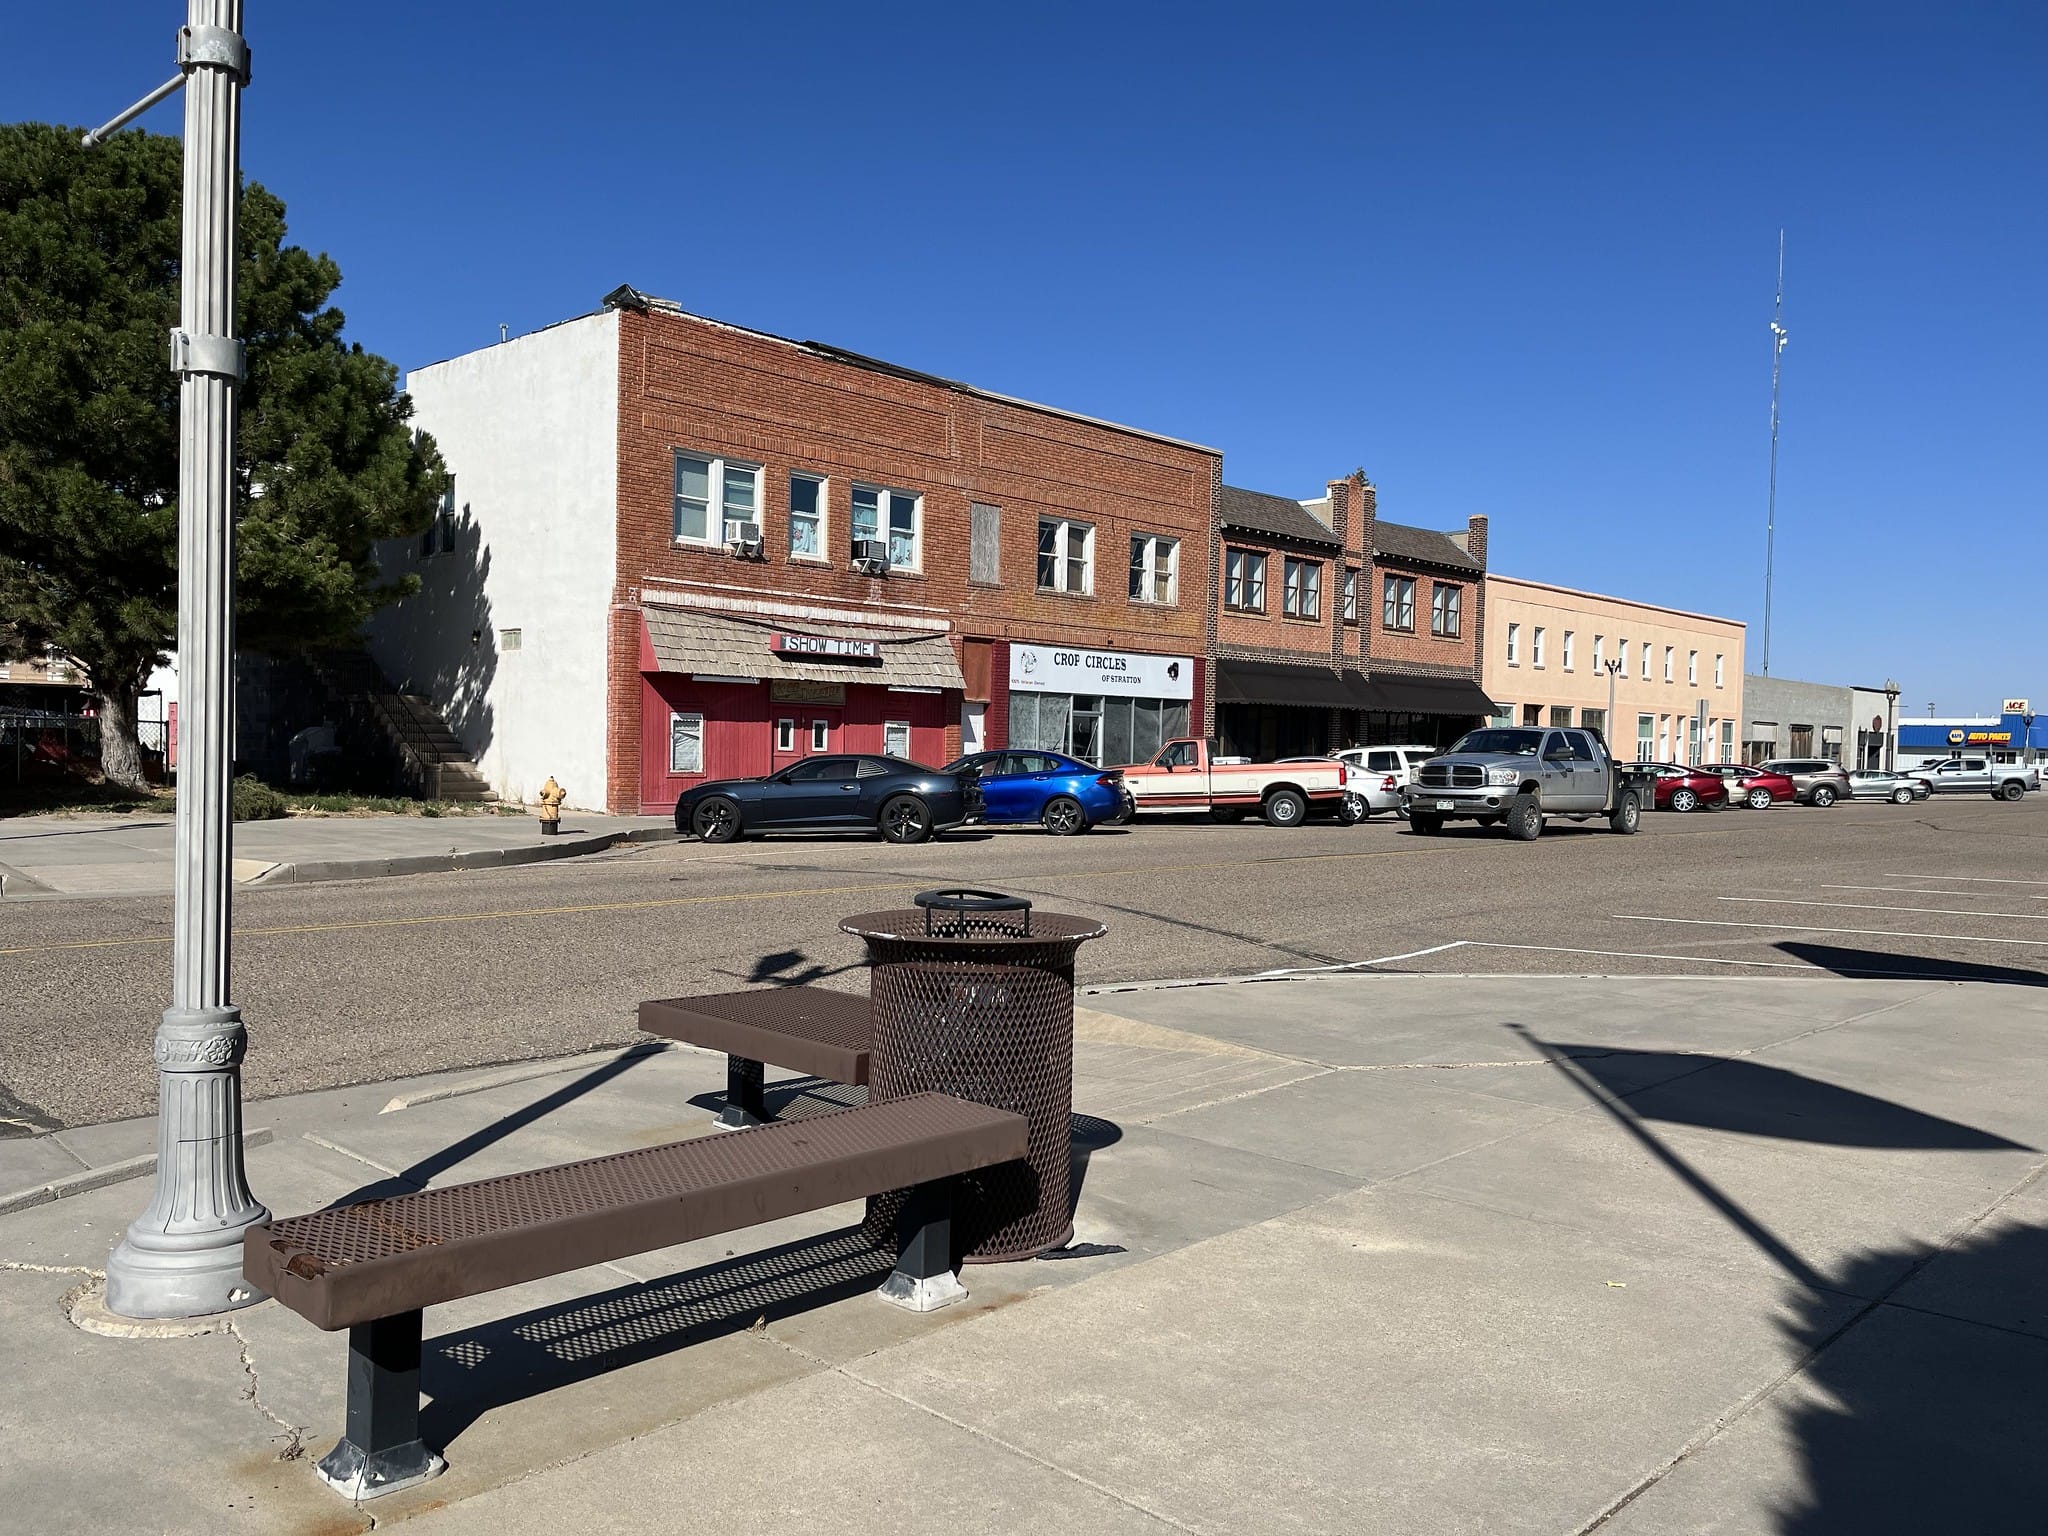 A small town downtown with brick-fronted buildings. On the corners are benches and old fashioned light poles.